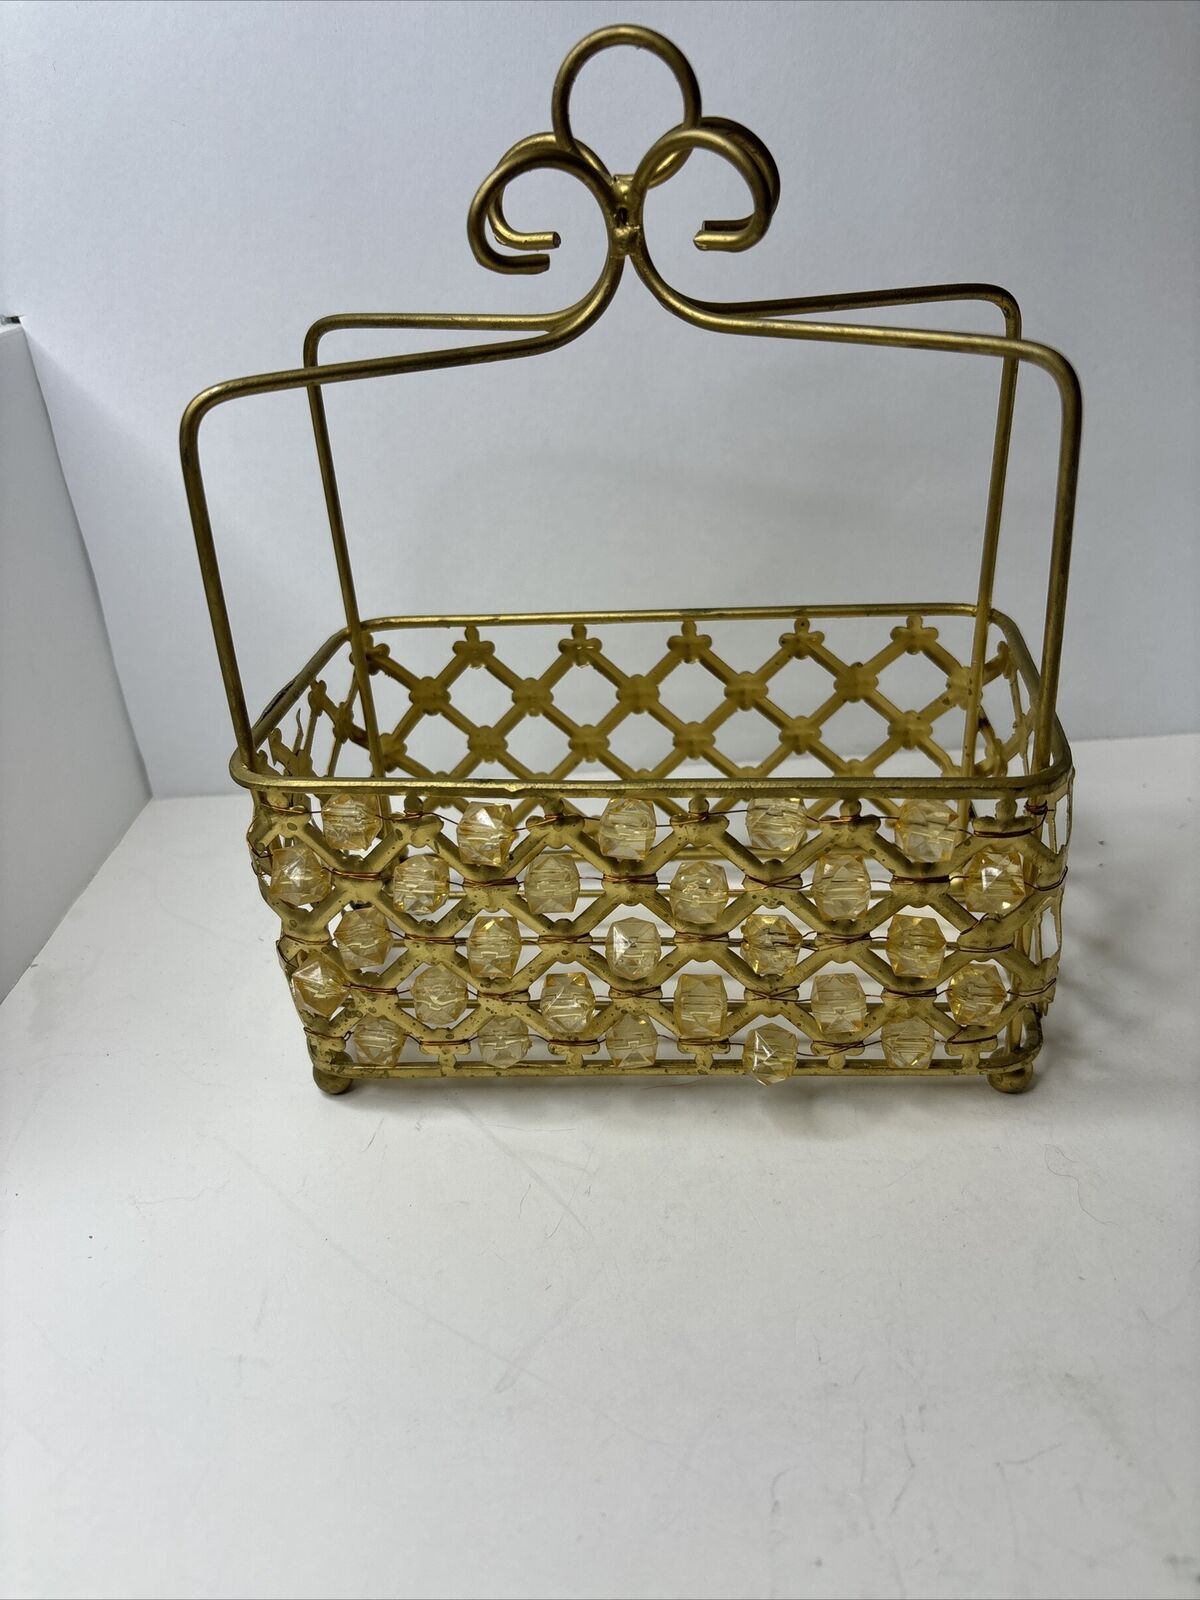 Metal Basket With Beads Bathroom Kitchen Holder Aproximately 7”x4” Mid Century